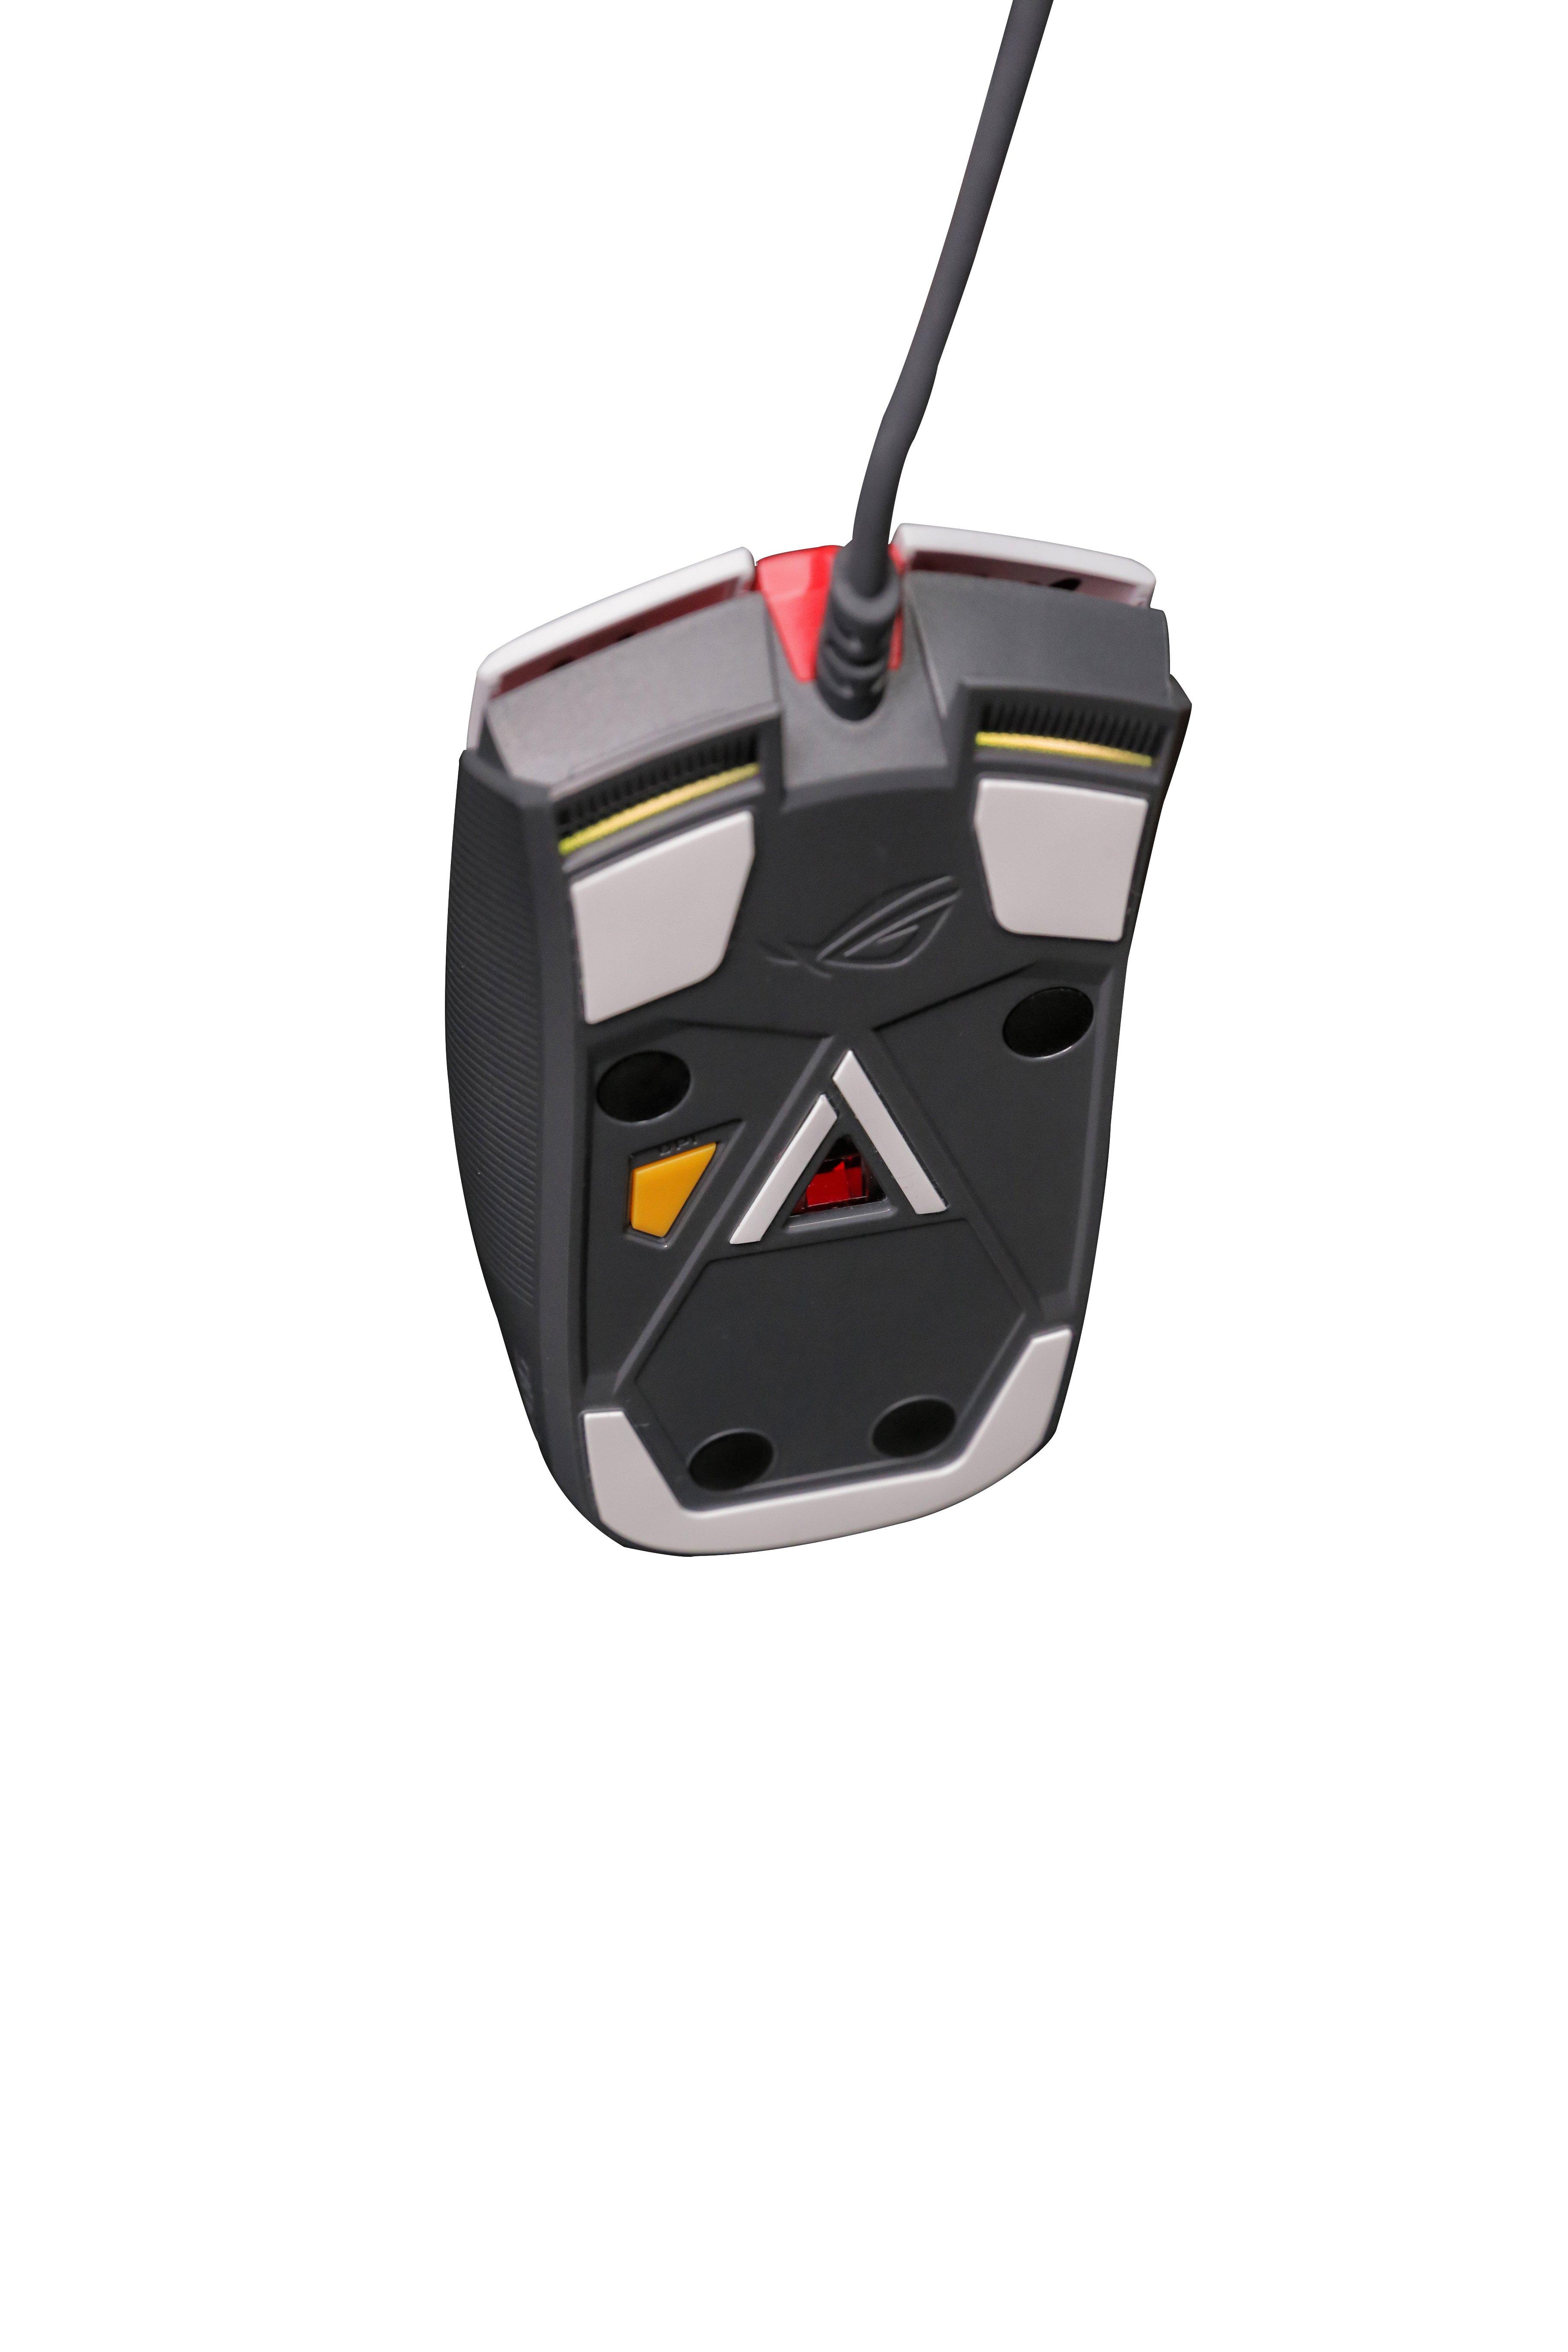 list item 13 of 14 ASUS ROG Strix Impact II GUNDAM EDITION Wired Gaming Mouse